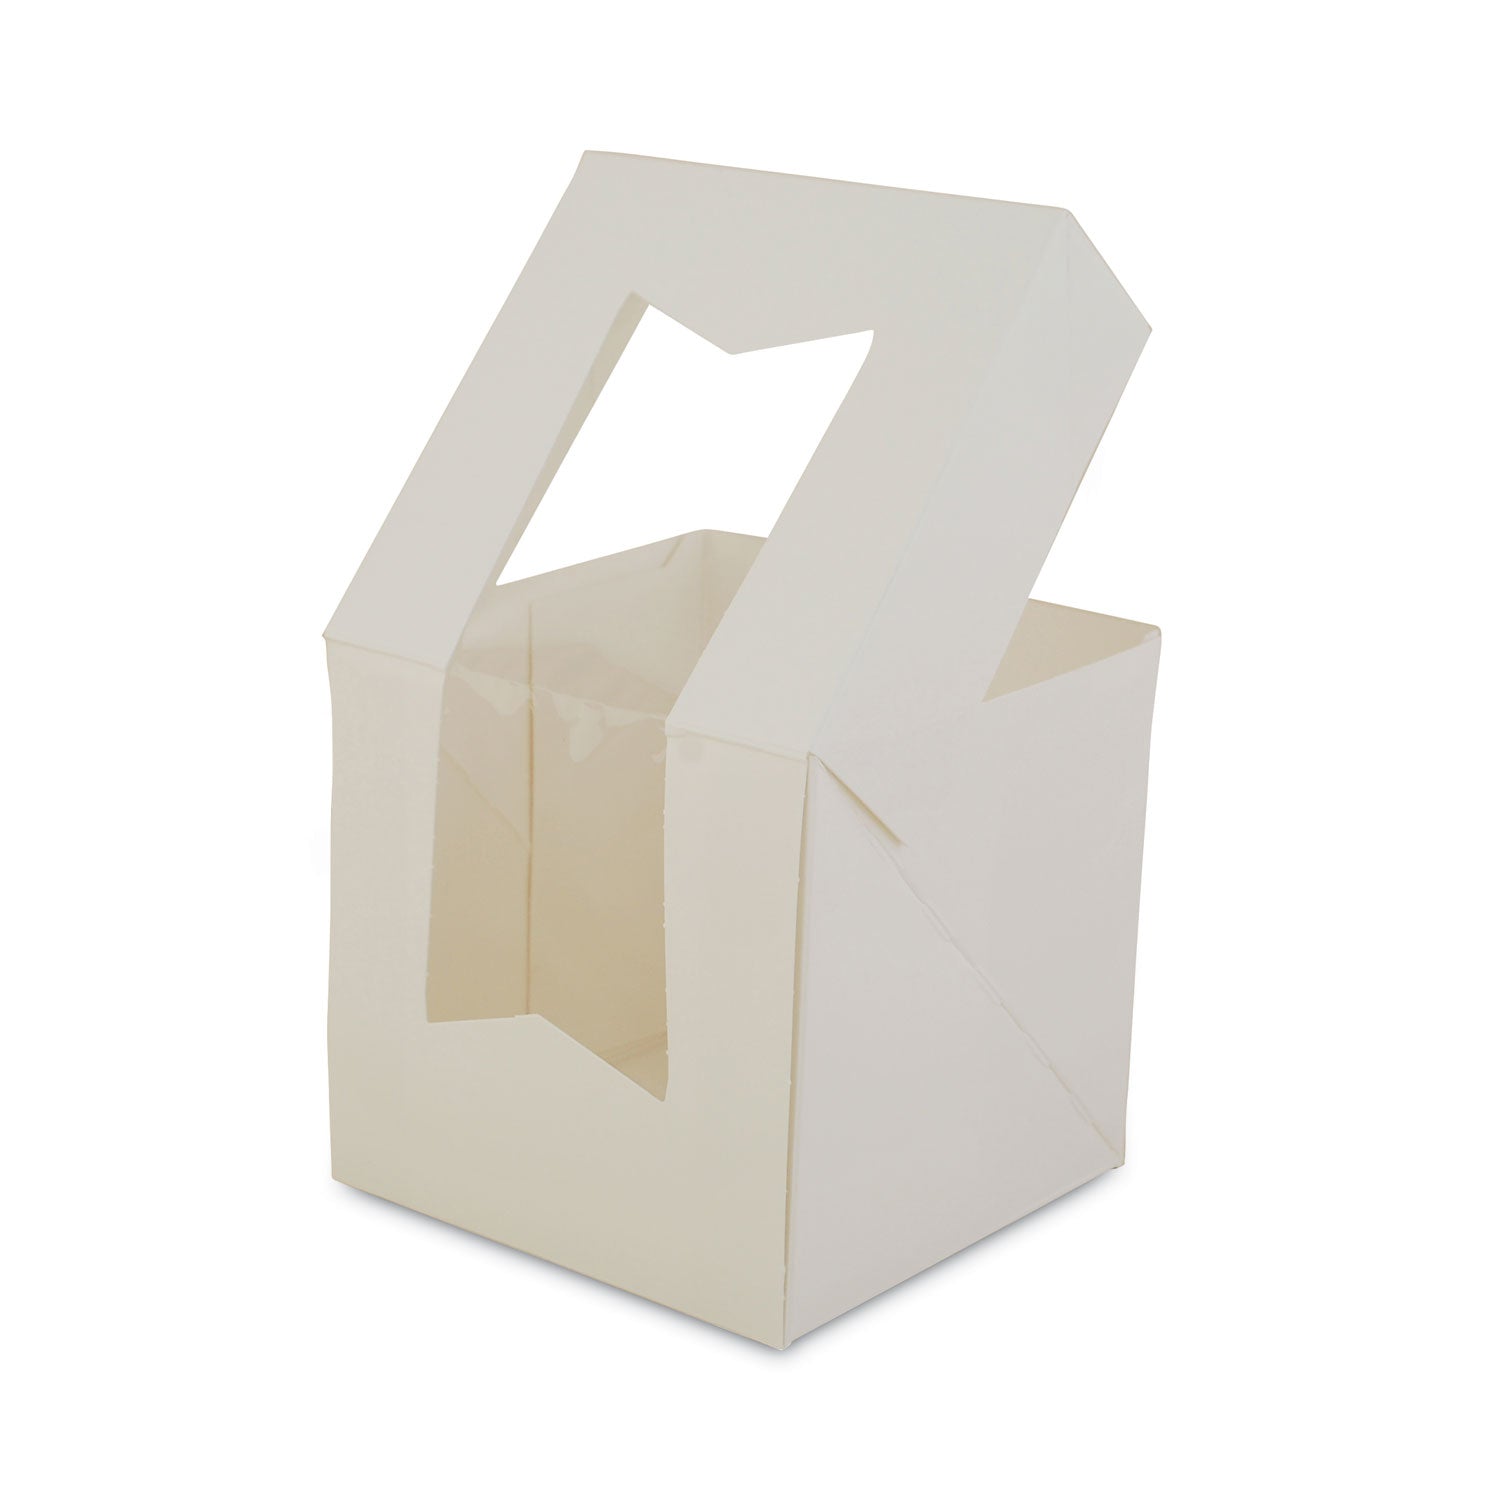 white-window-bakery-boxes-with-attached-flip-top-4-corner-beers-design-45-x-45-x-45-white-paper-200-carton_sch24033 - 2